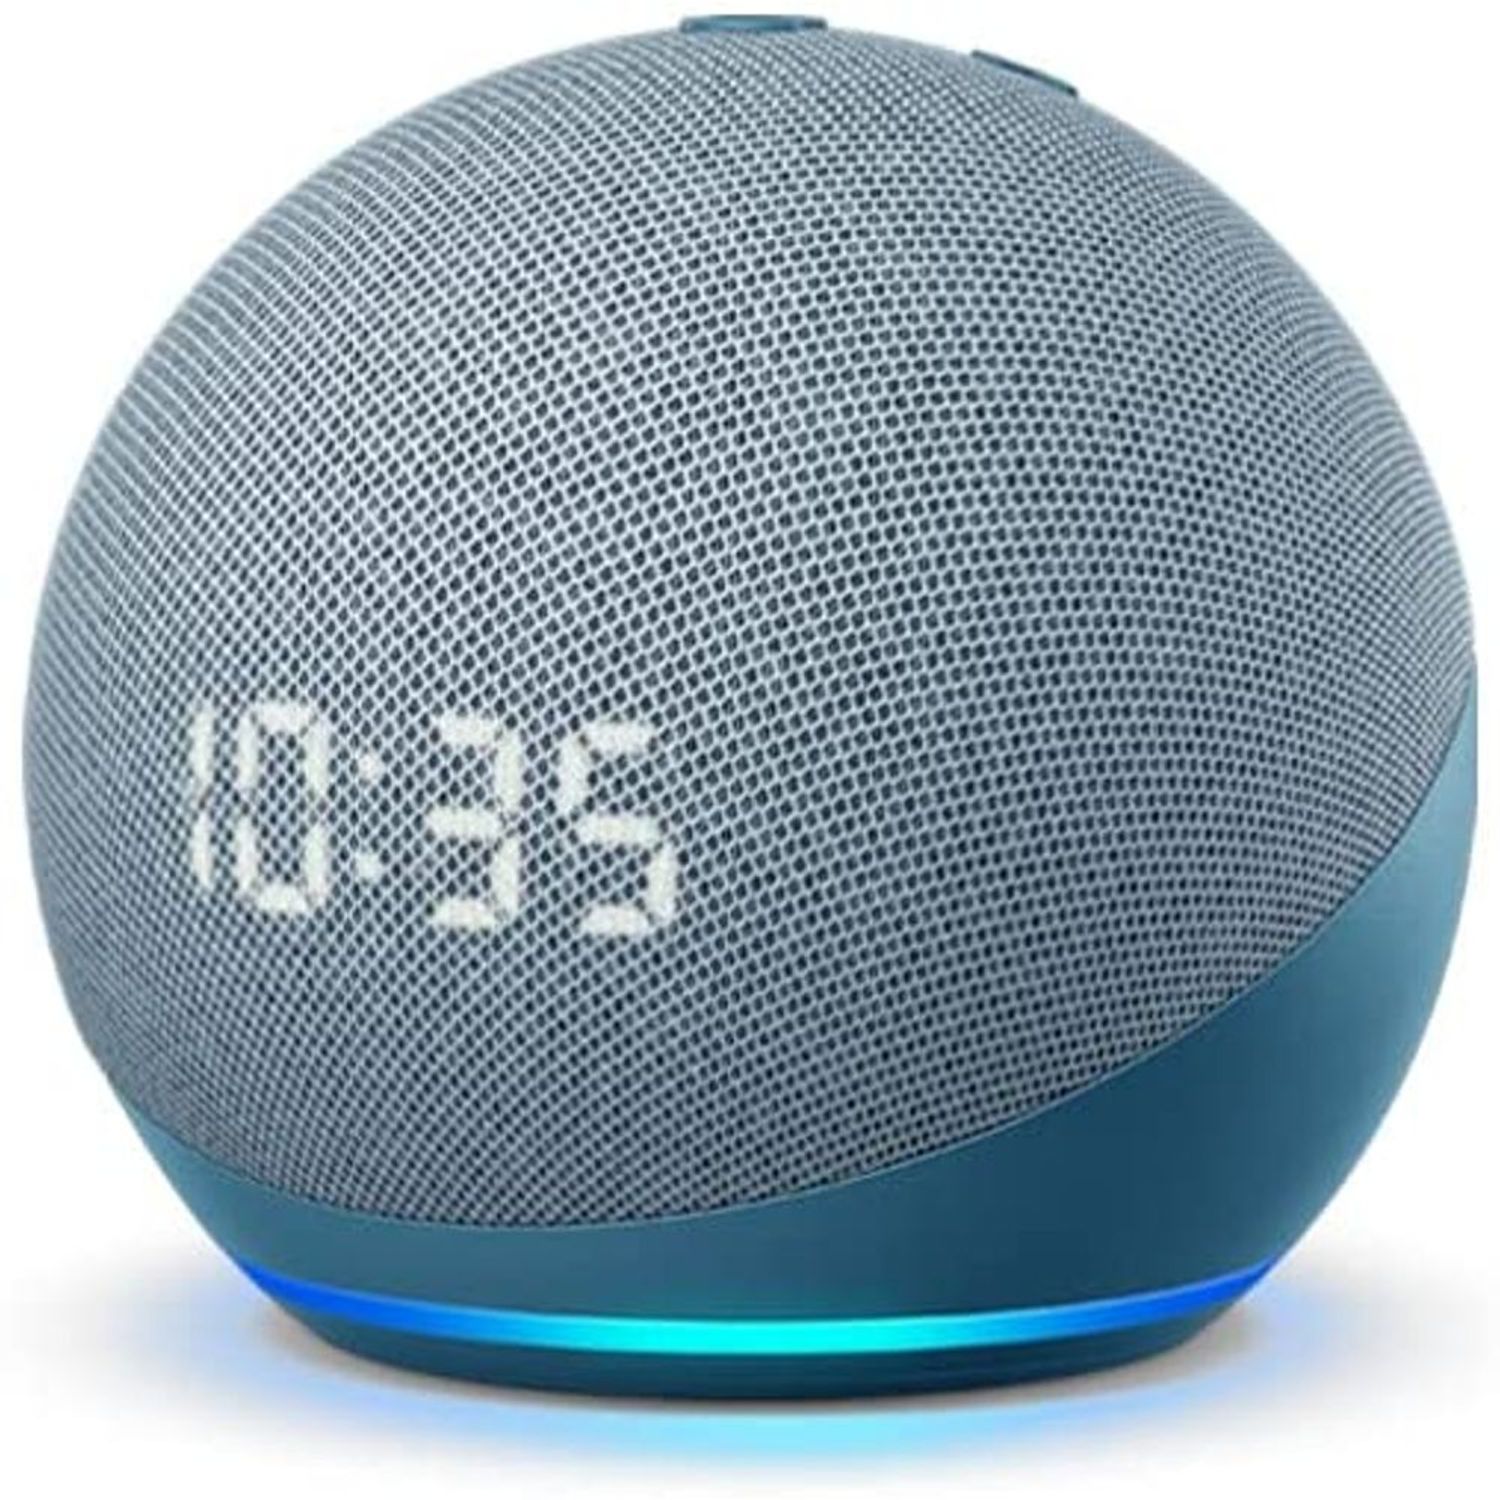 PARLANTE  ECHO DOT 4TH GEN WITH ALEXA CHARCOAL